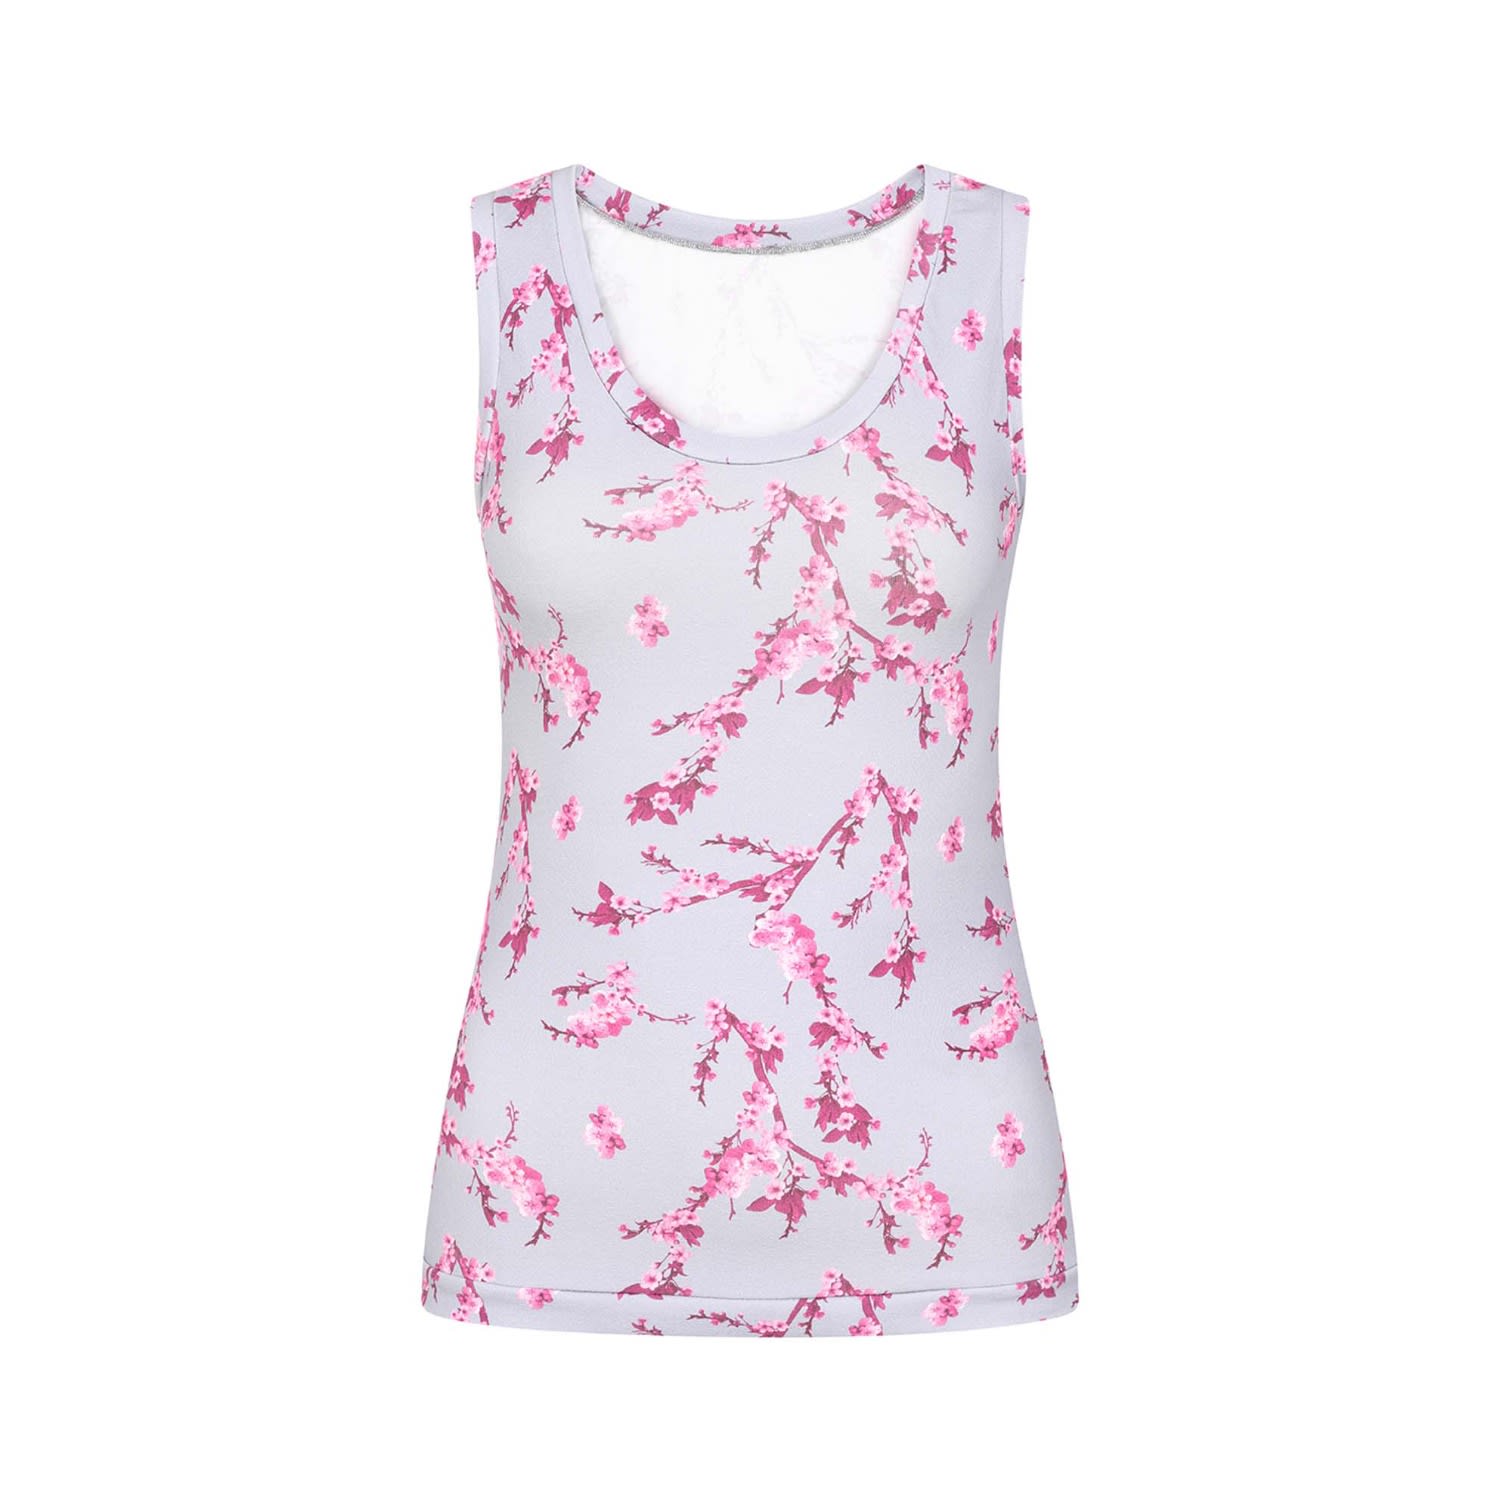 Women’s Grey & Pink Floral Vest Top Extra Small Sophie Cameron Davies